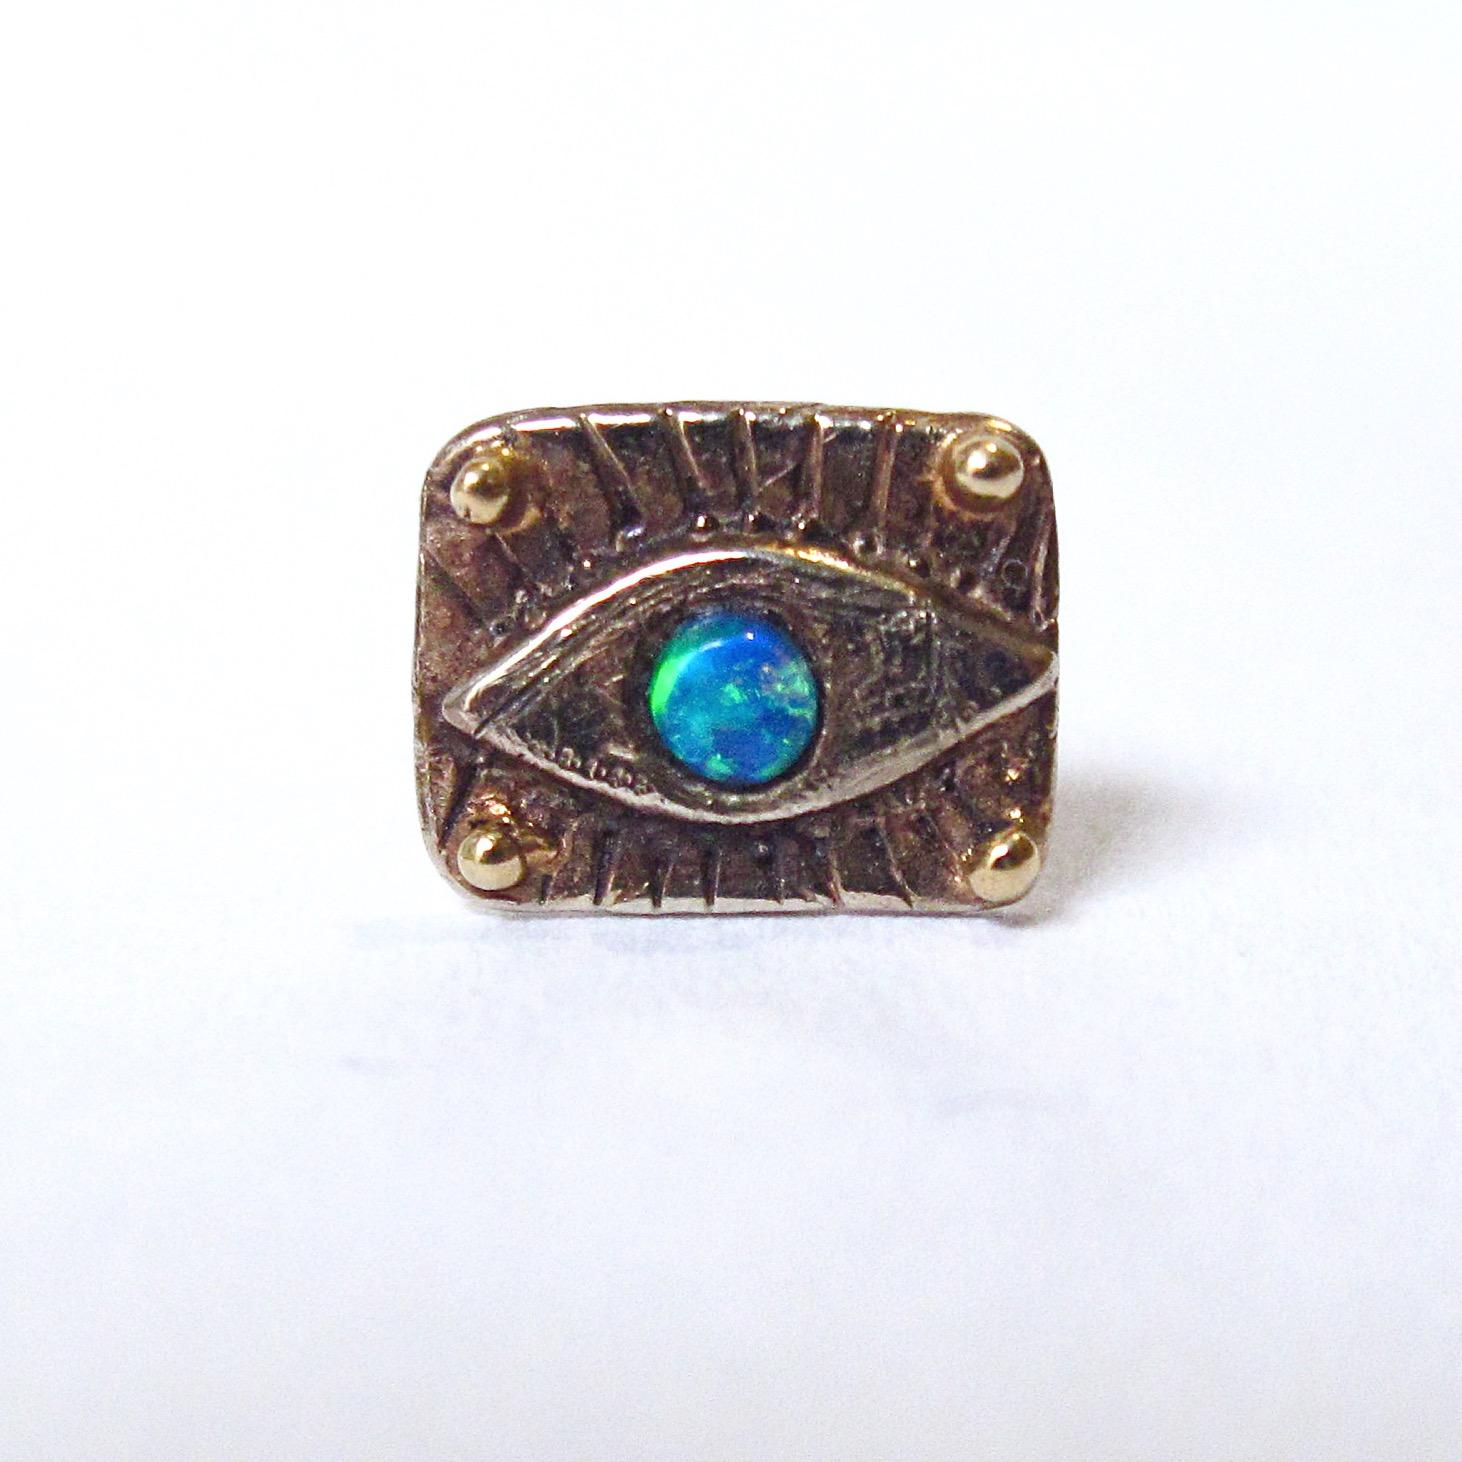 18k white gold evil eye stud earring with dynamic opal cabochon and 22k gold granulated bead adornments. 